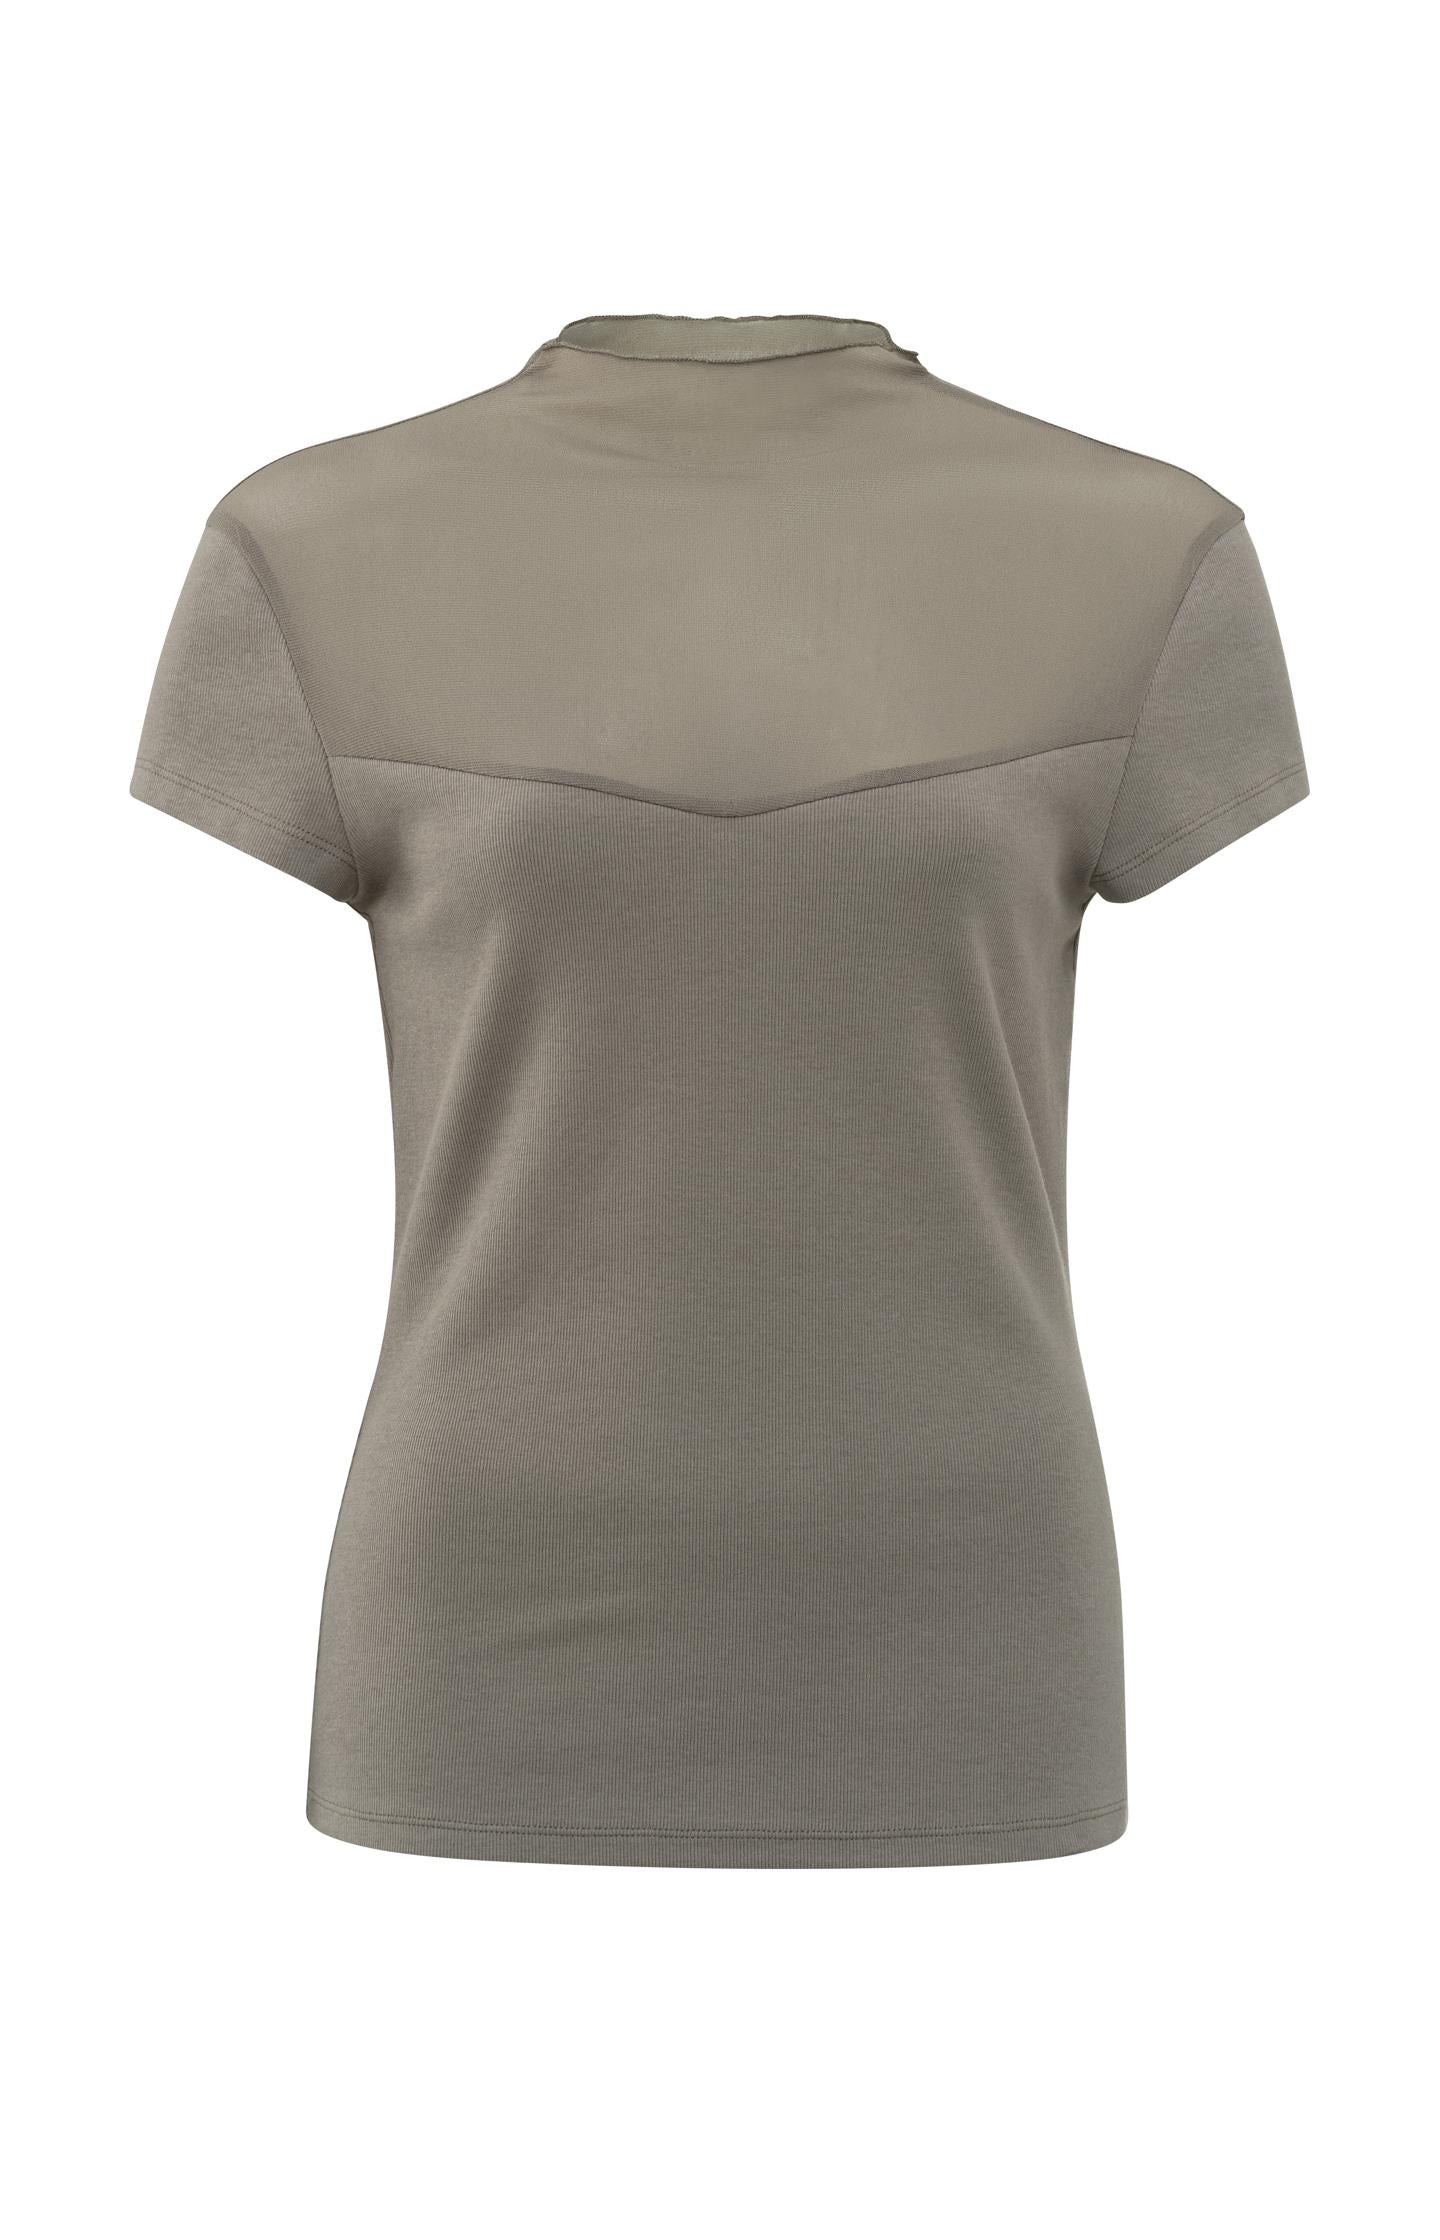 Top with cap sleeves and transparent detail - Type: product